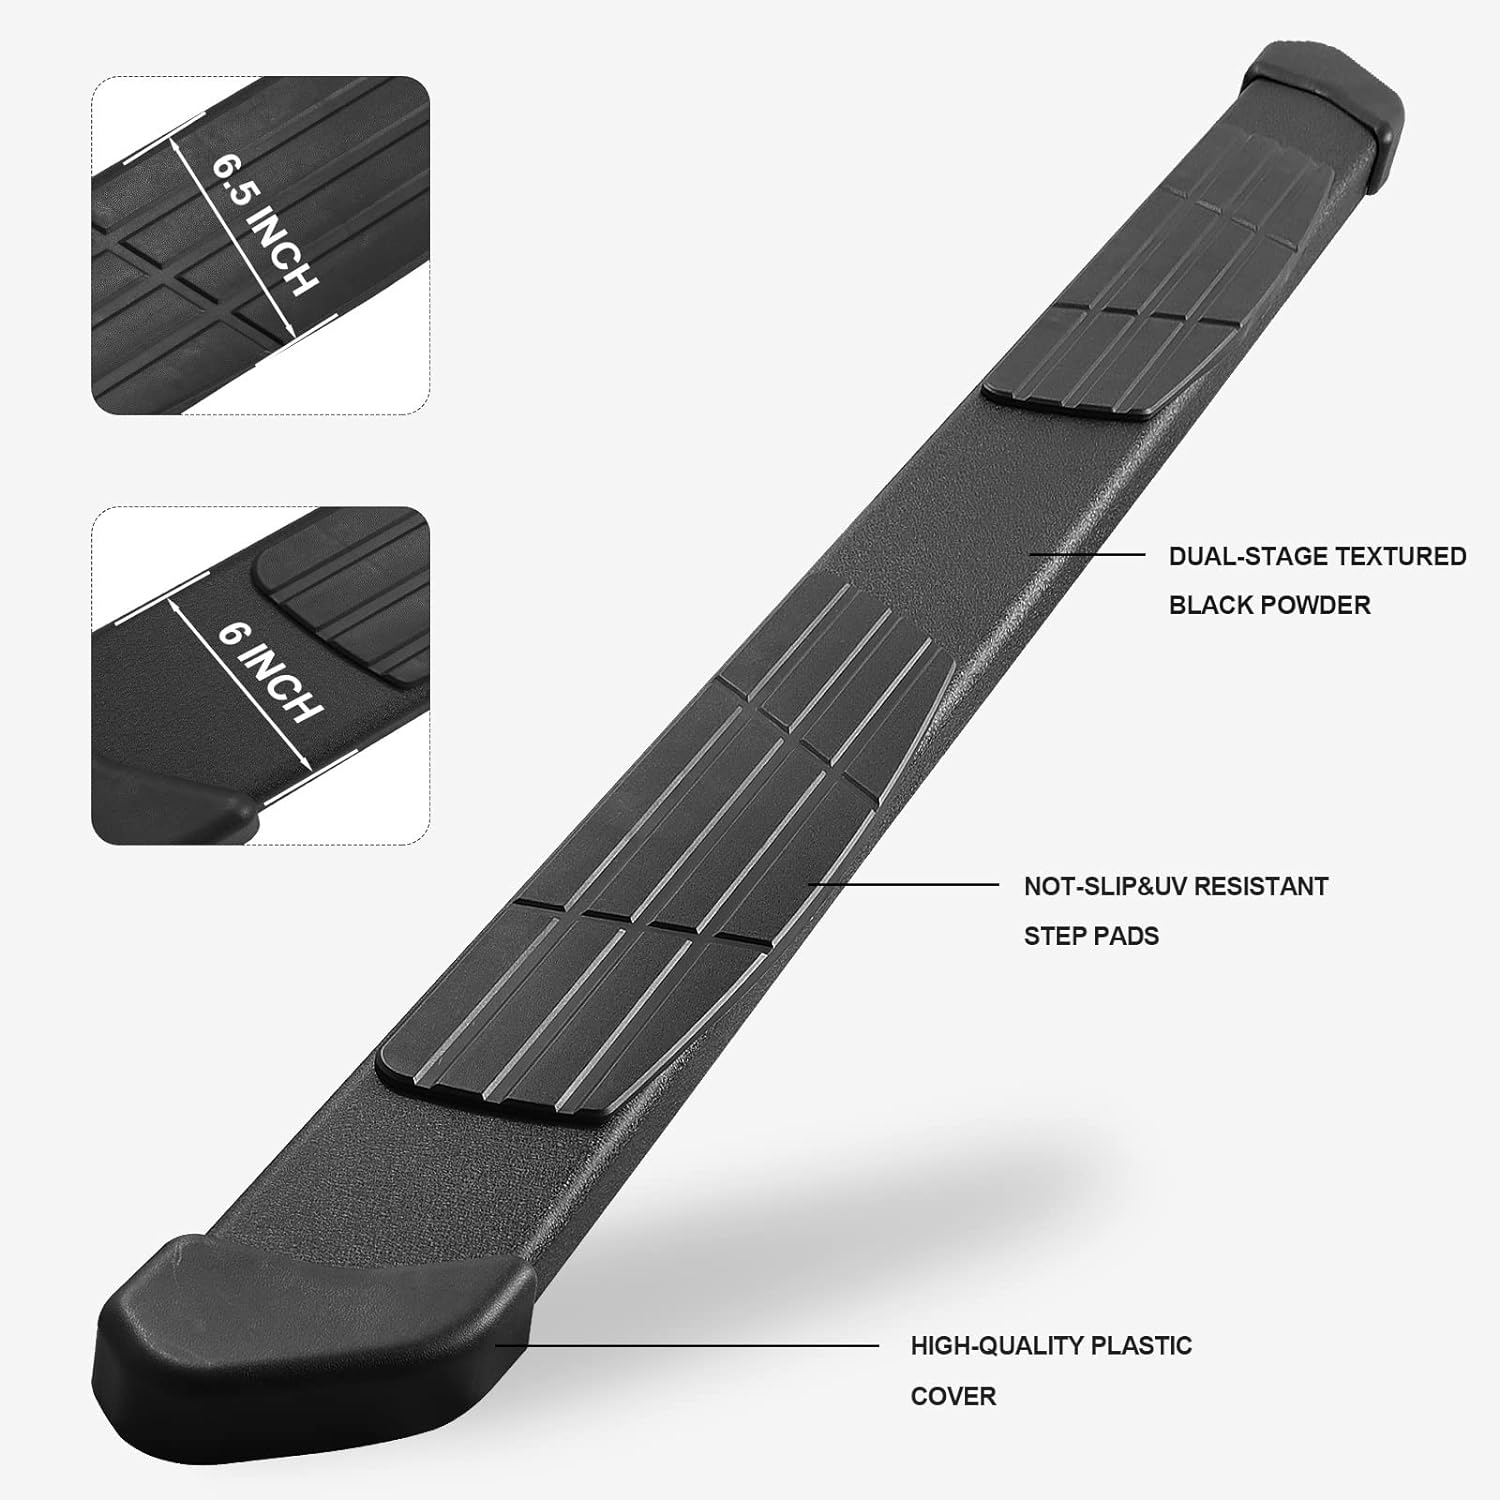 6.5 Inches Black Running Boards for 2024 Toyota Tacoma Double Cab with 4 Full-Size Doors. Side Steps Running Boards for Toyota Tacoma Made with Carbon Steel.-COMNOVA AUTOPART